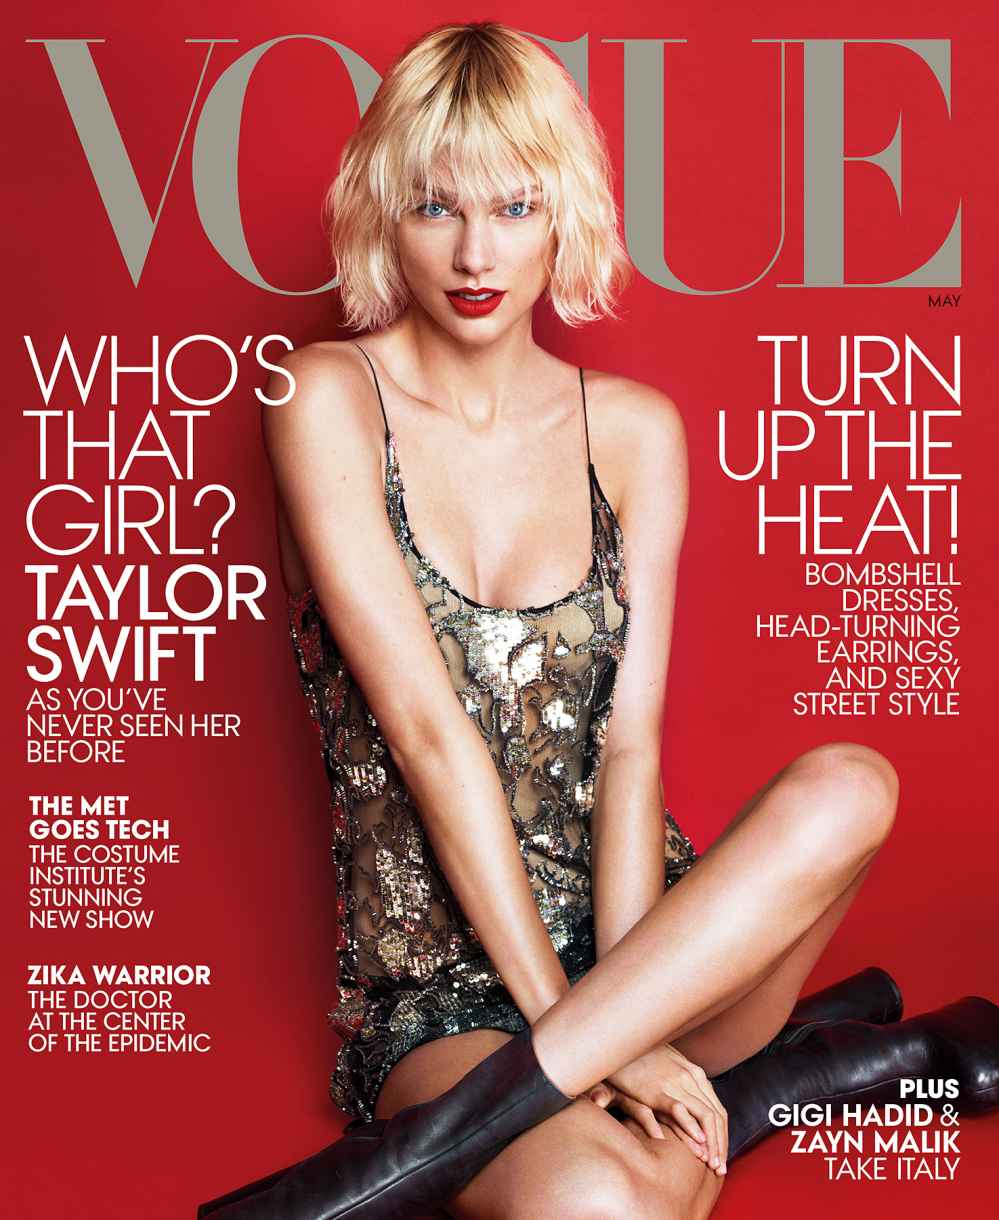 Taylor Swift on the cover of 'Vogue.'